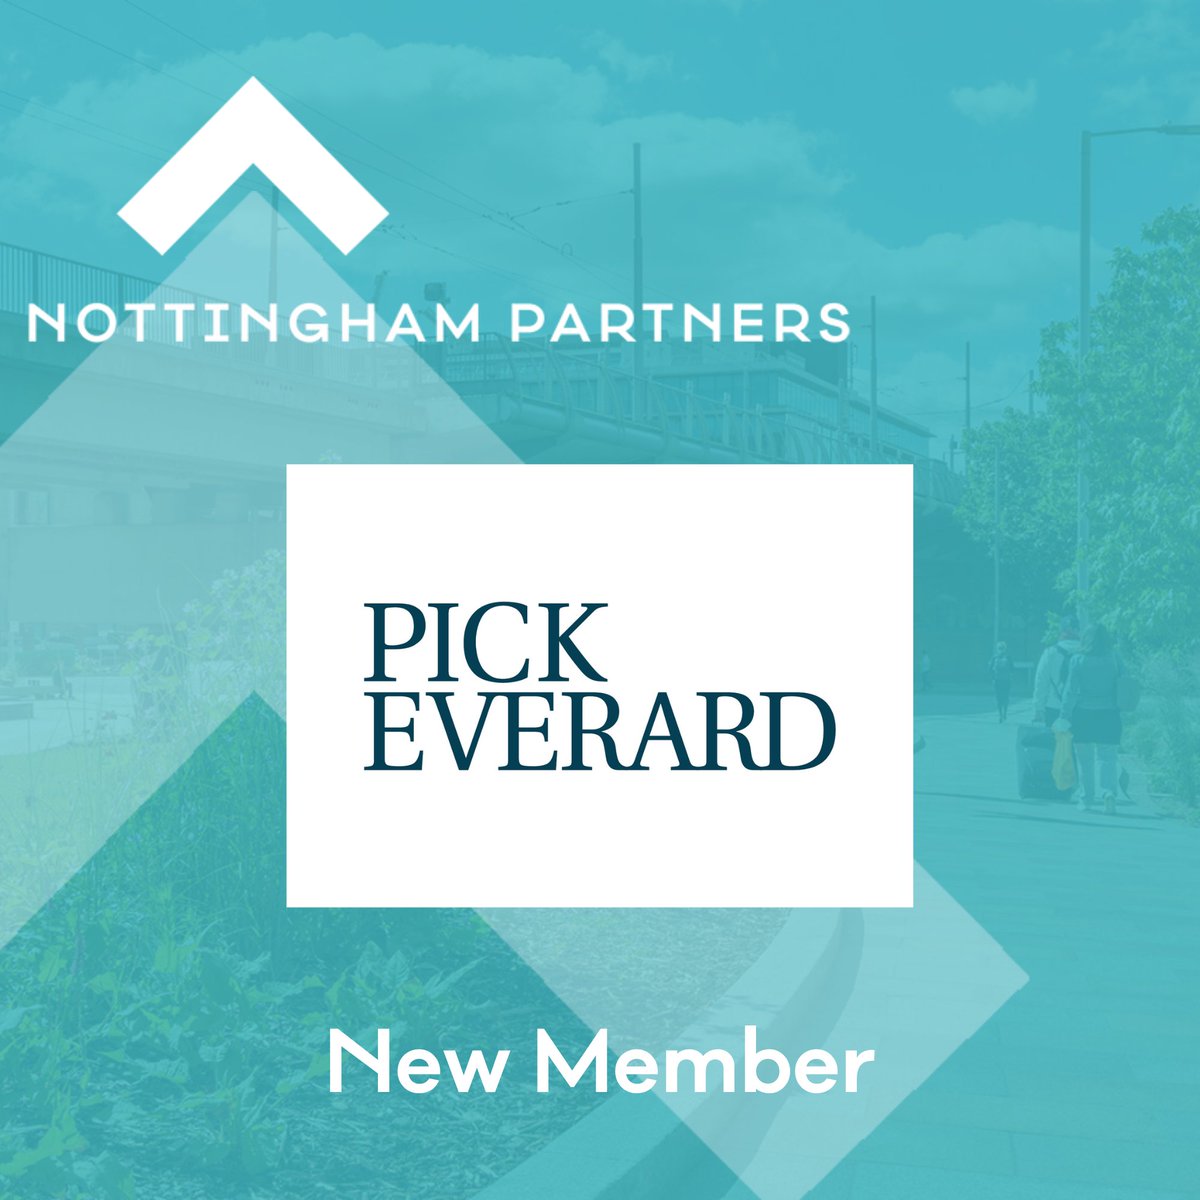 Welcome to our new member, @PickEverard! A leading multi-disciplinary property, construction, and infrastructure consultancy, with a 600-strong team supporting clients from its 15 offices – including an office in Nottingham. Find out more here: nottinghampartners.co.uk/members/member…